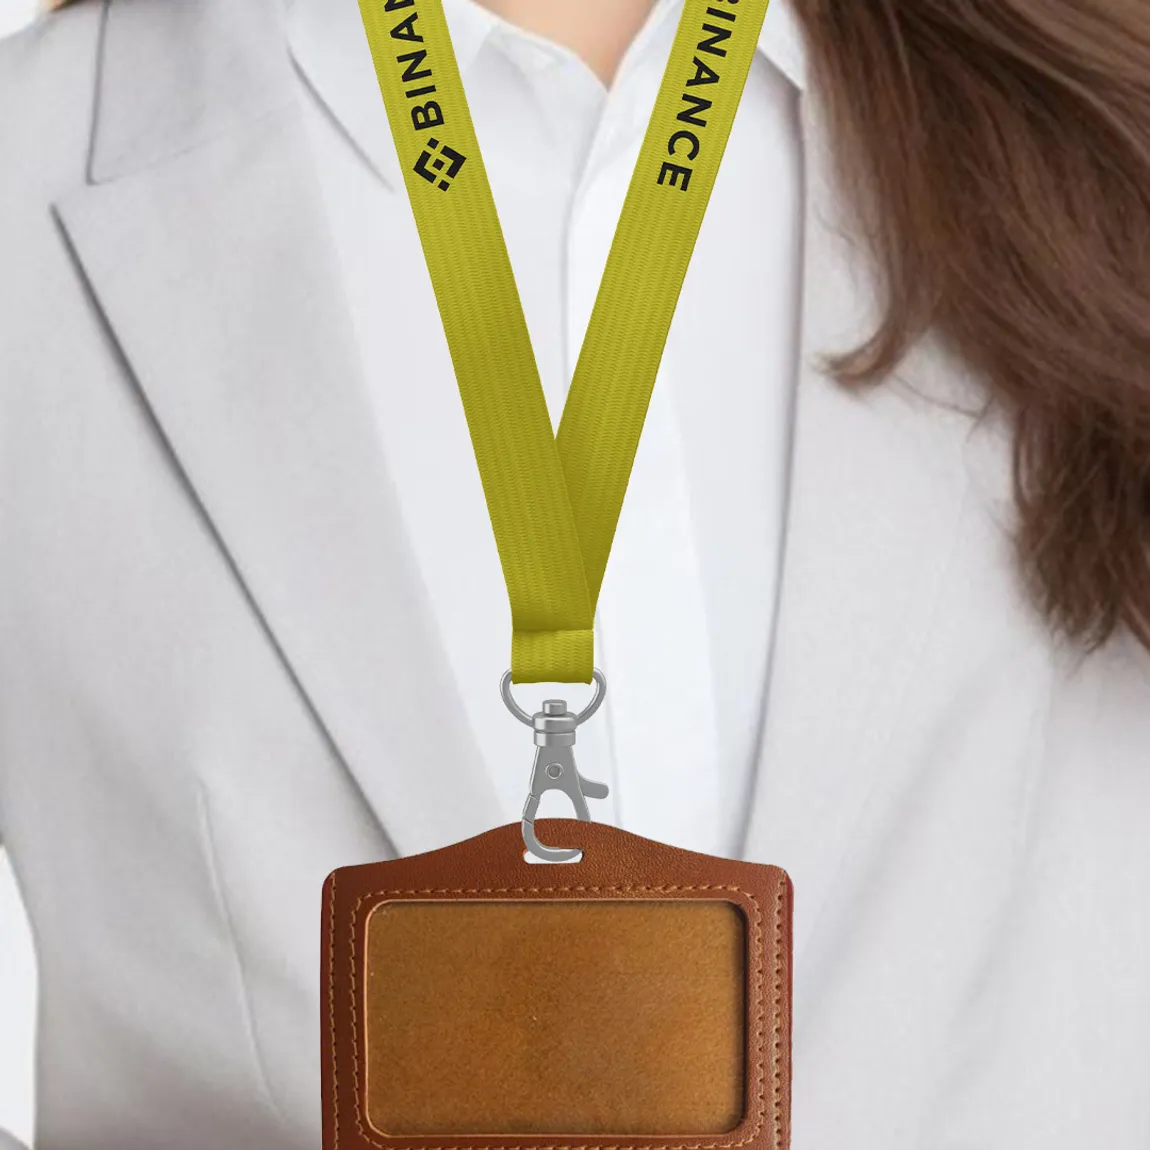 Lanyards & ID Cards - Polyester lanyard with Badge Holders